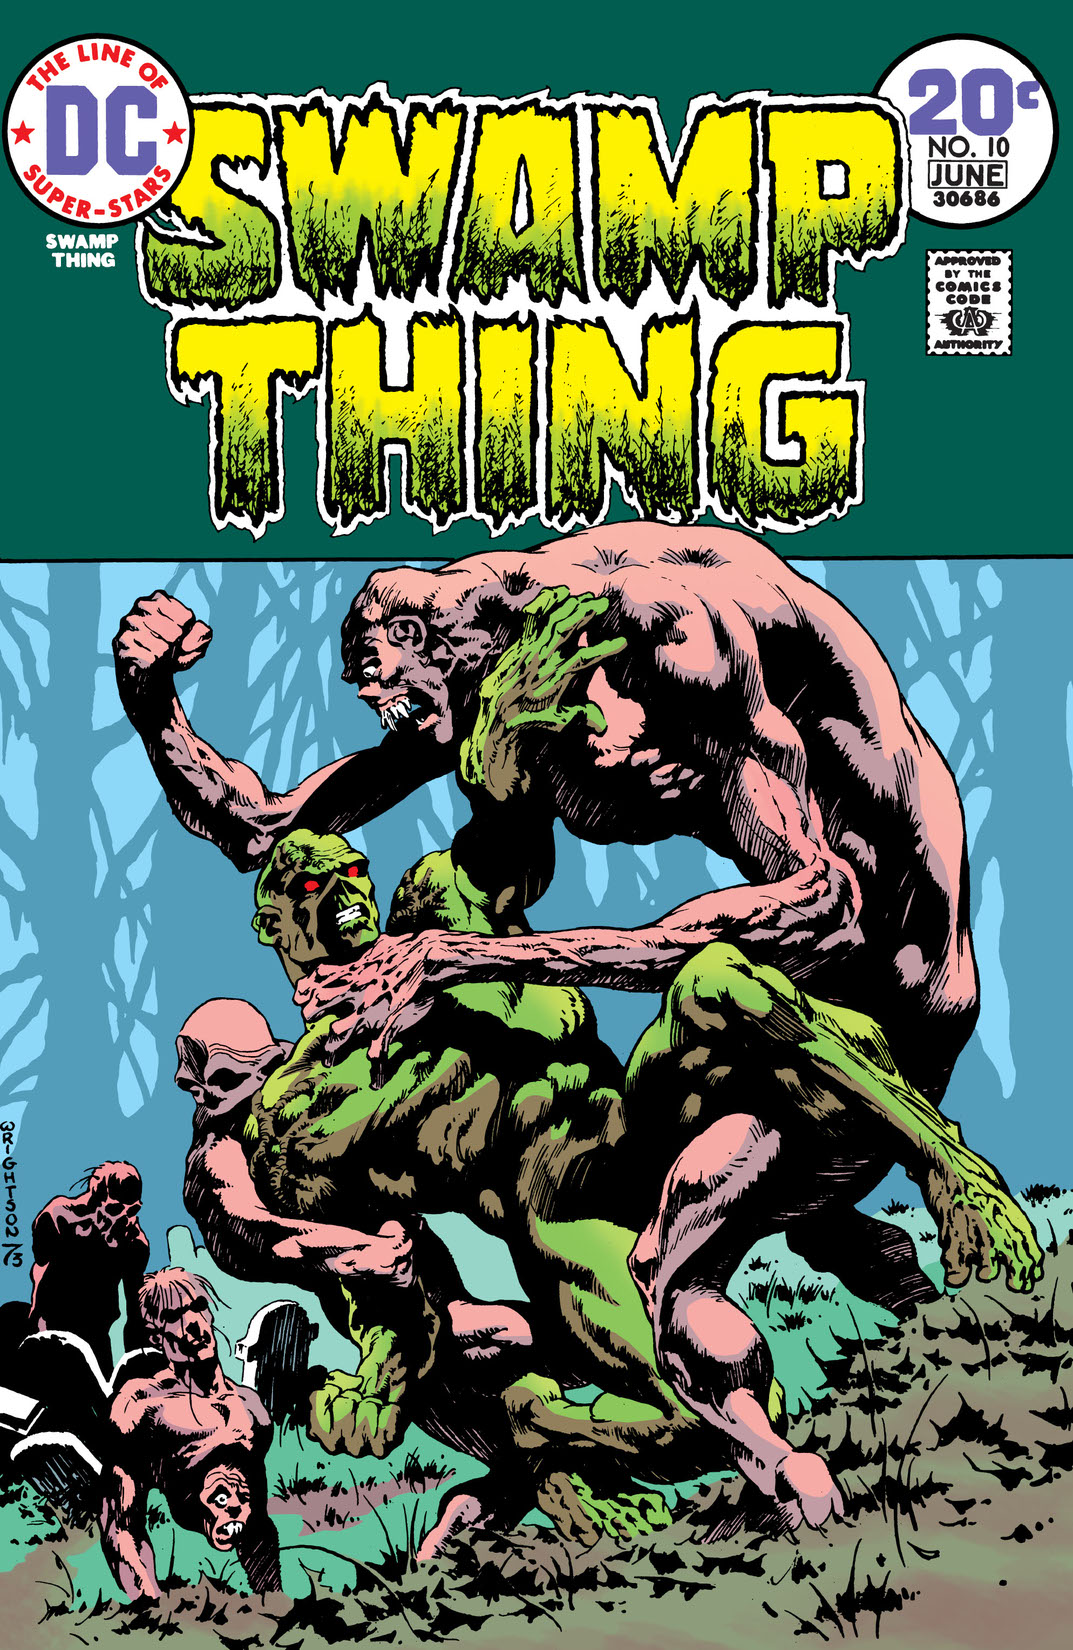 Swamp Thing (1972-) #10 preview images